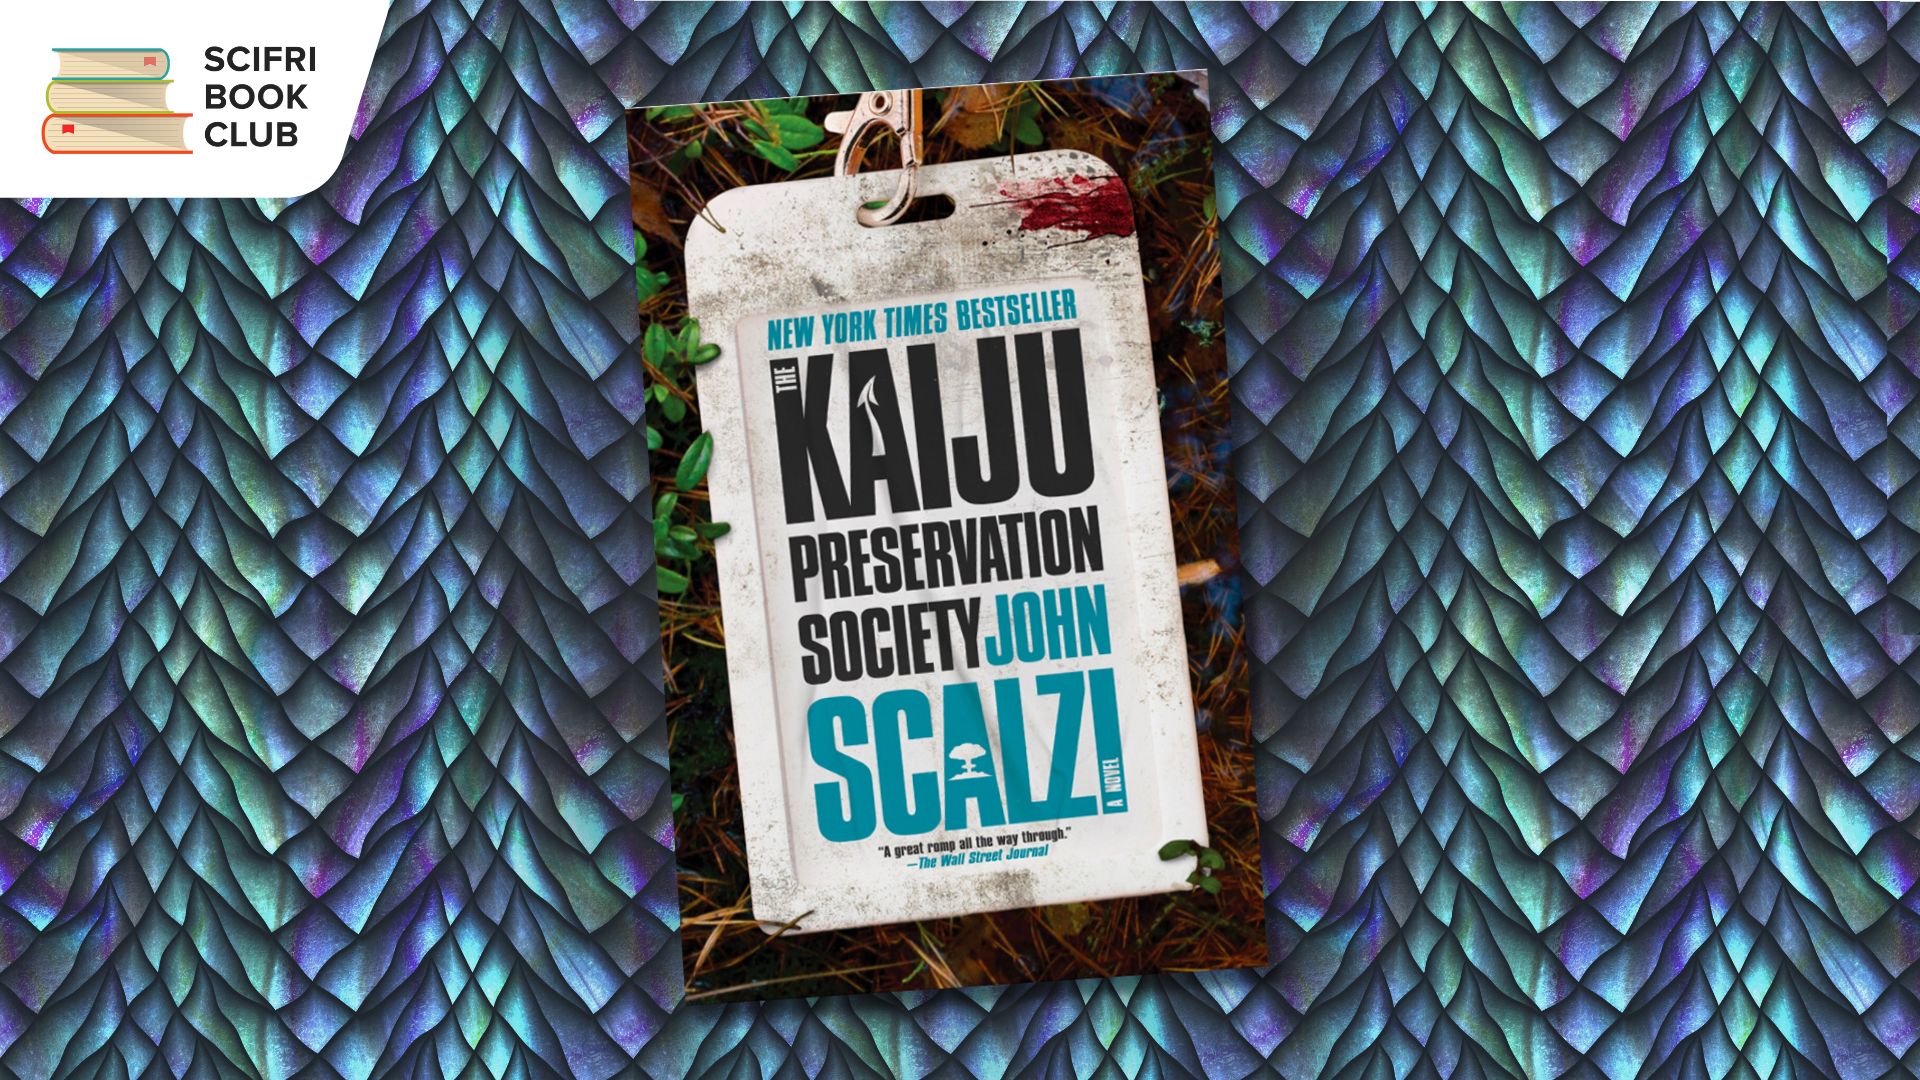 The cover of THE KAIJU PRESERVATION SOCIETY by John Scalzi with a background featuring blue, green and purple scales, like that of a dragon or other mythical creature